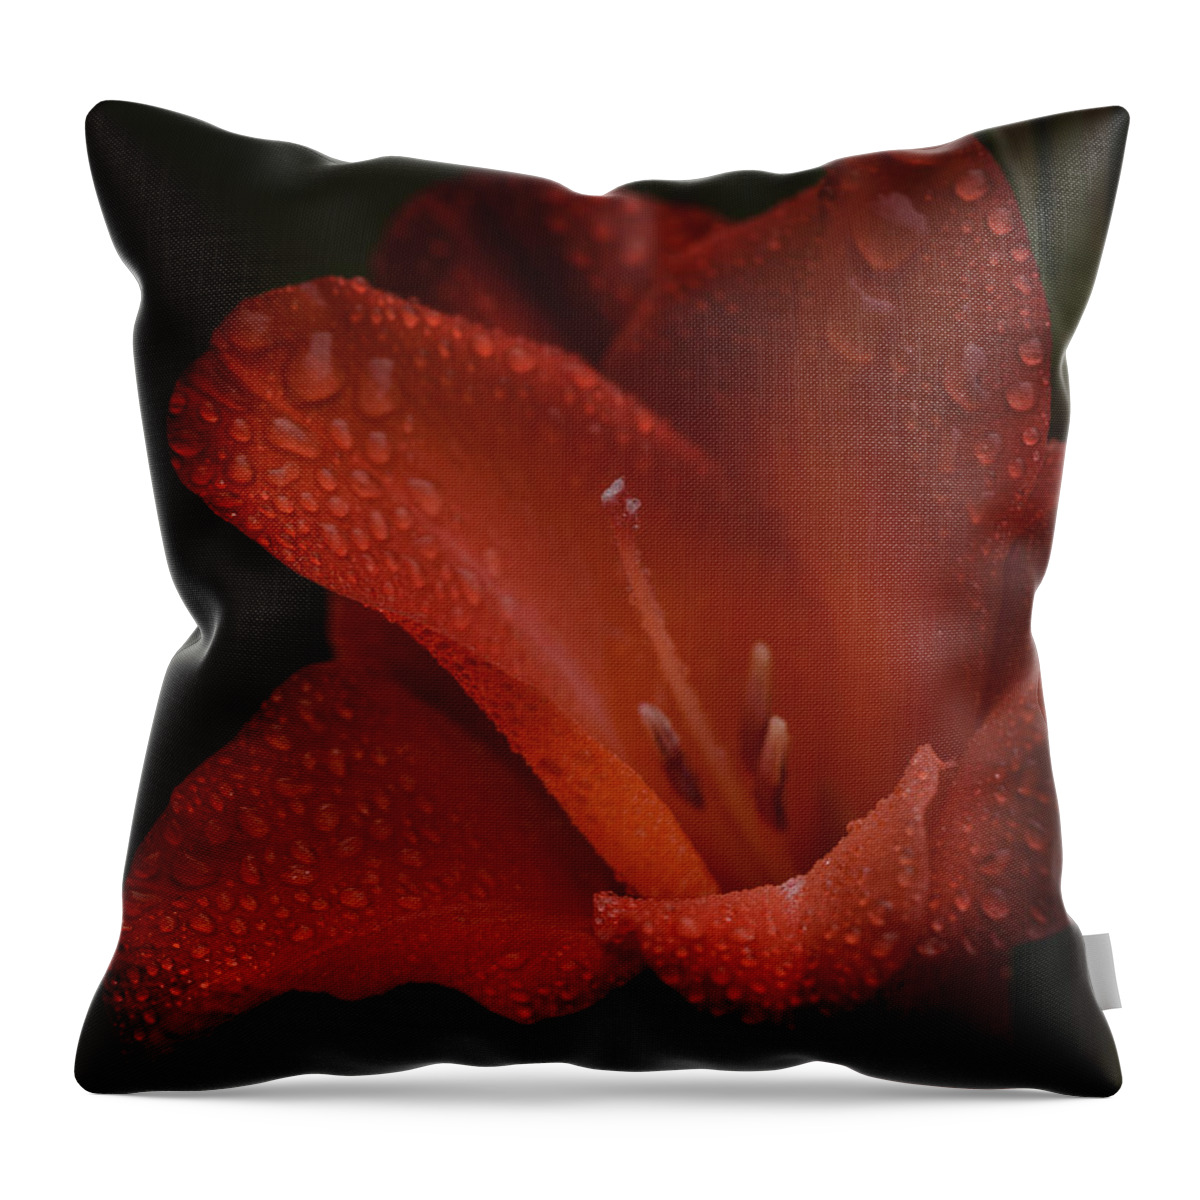 Gladiolus Throw Pillow featuring the photograph Gladiolus II Dew Drops by Richard Macquade